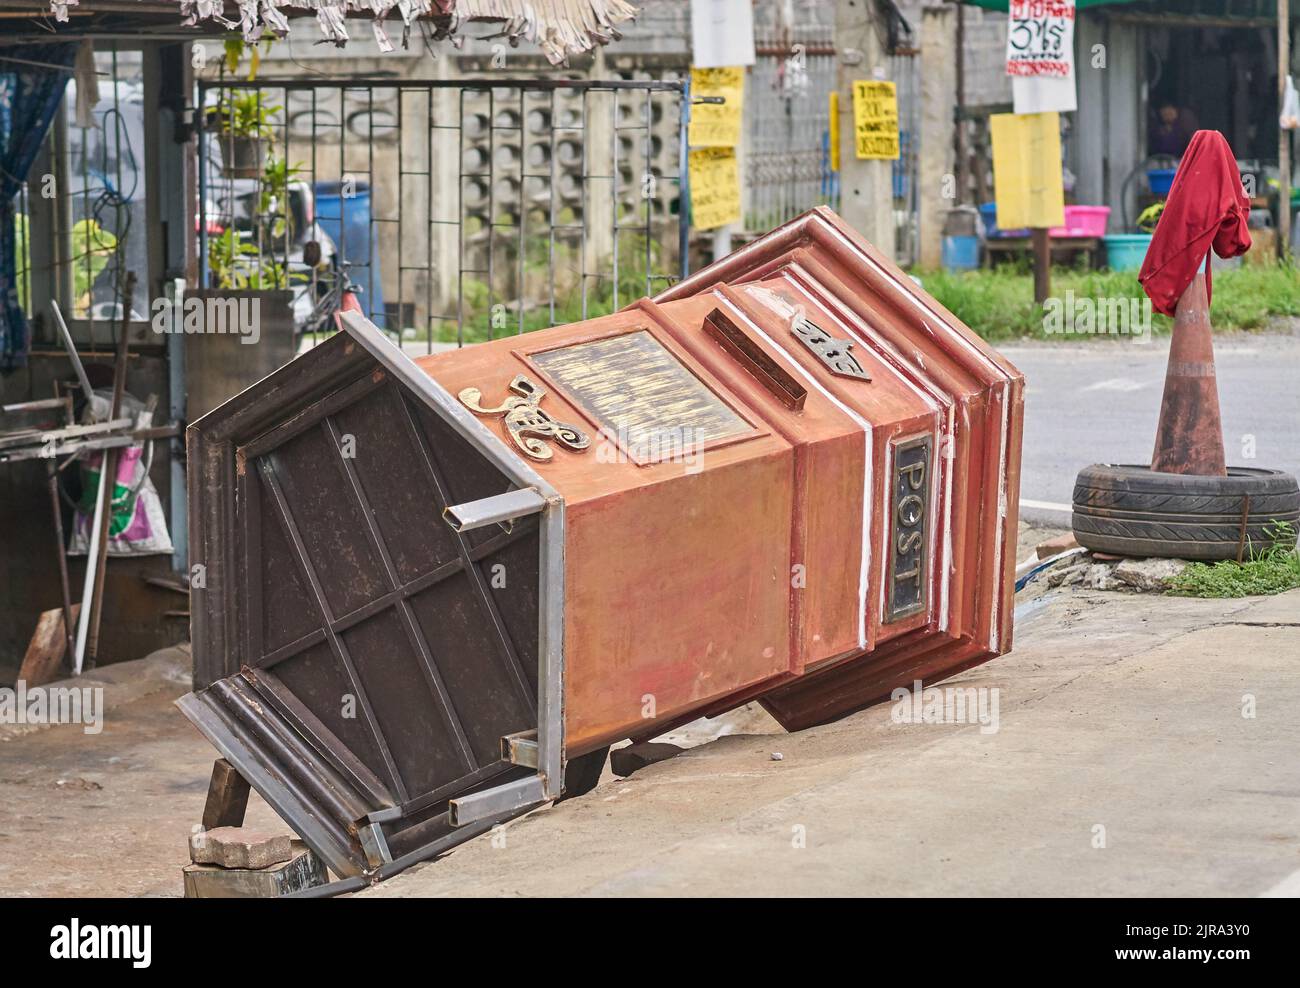 A large post office collection box toppled over on a street, in Thailand. Stock Photo